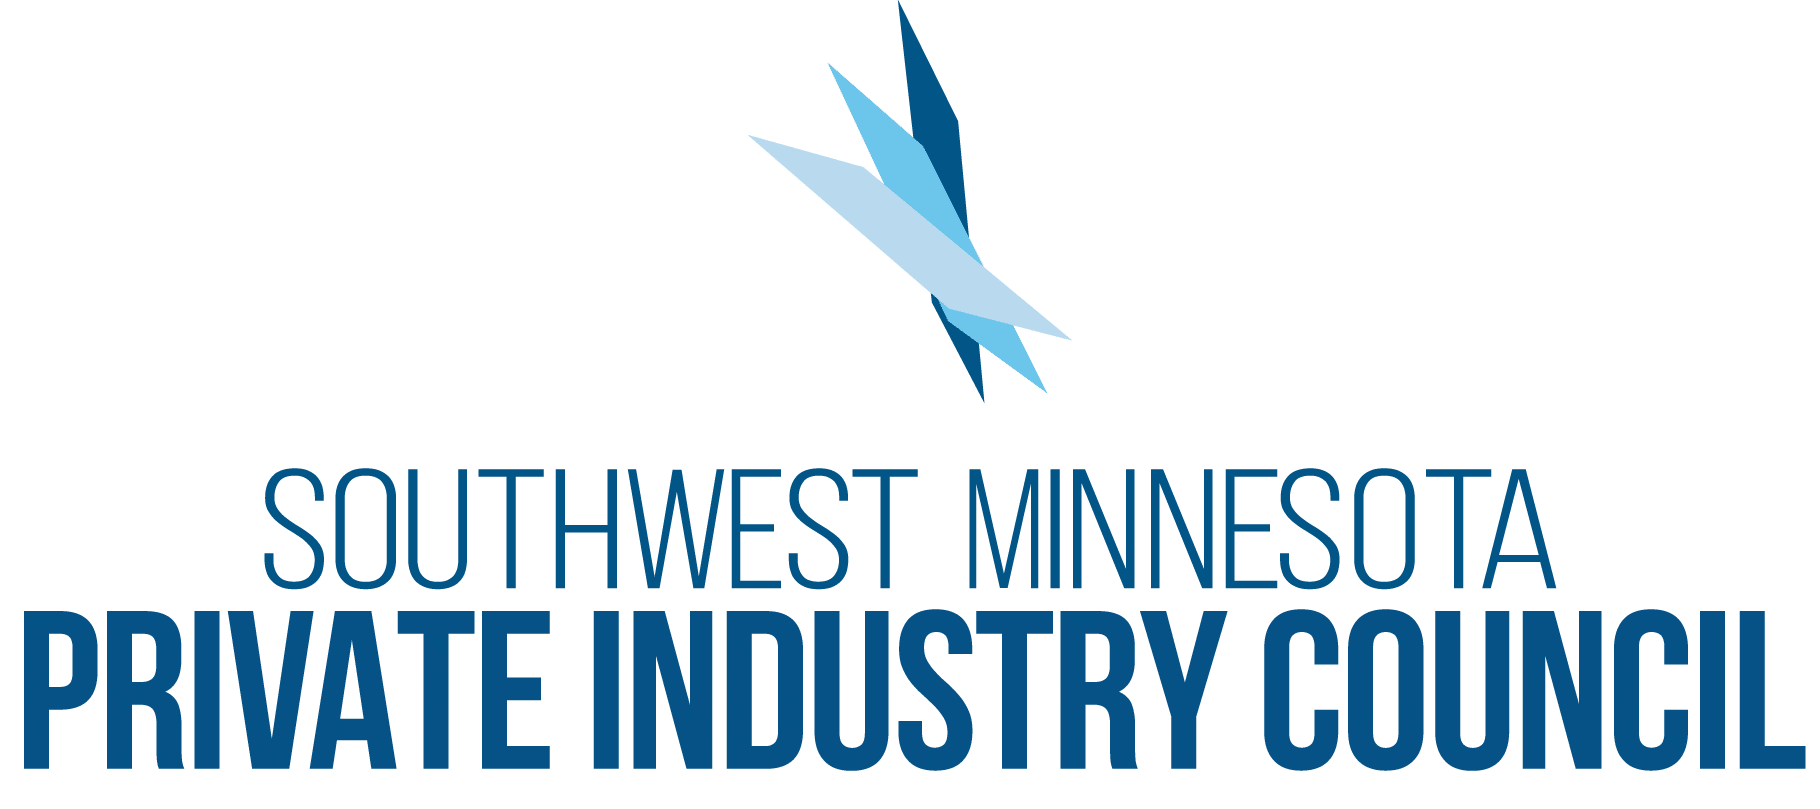 southwest mn private industry council smaller stack logo